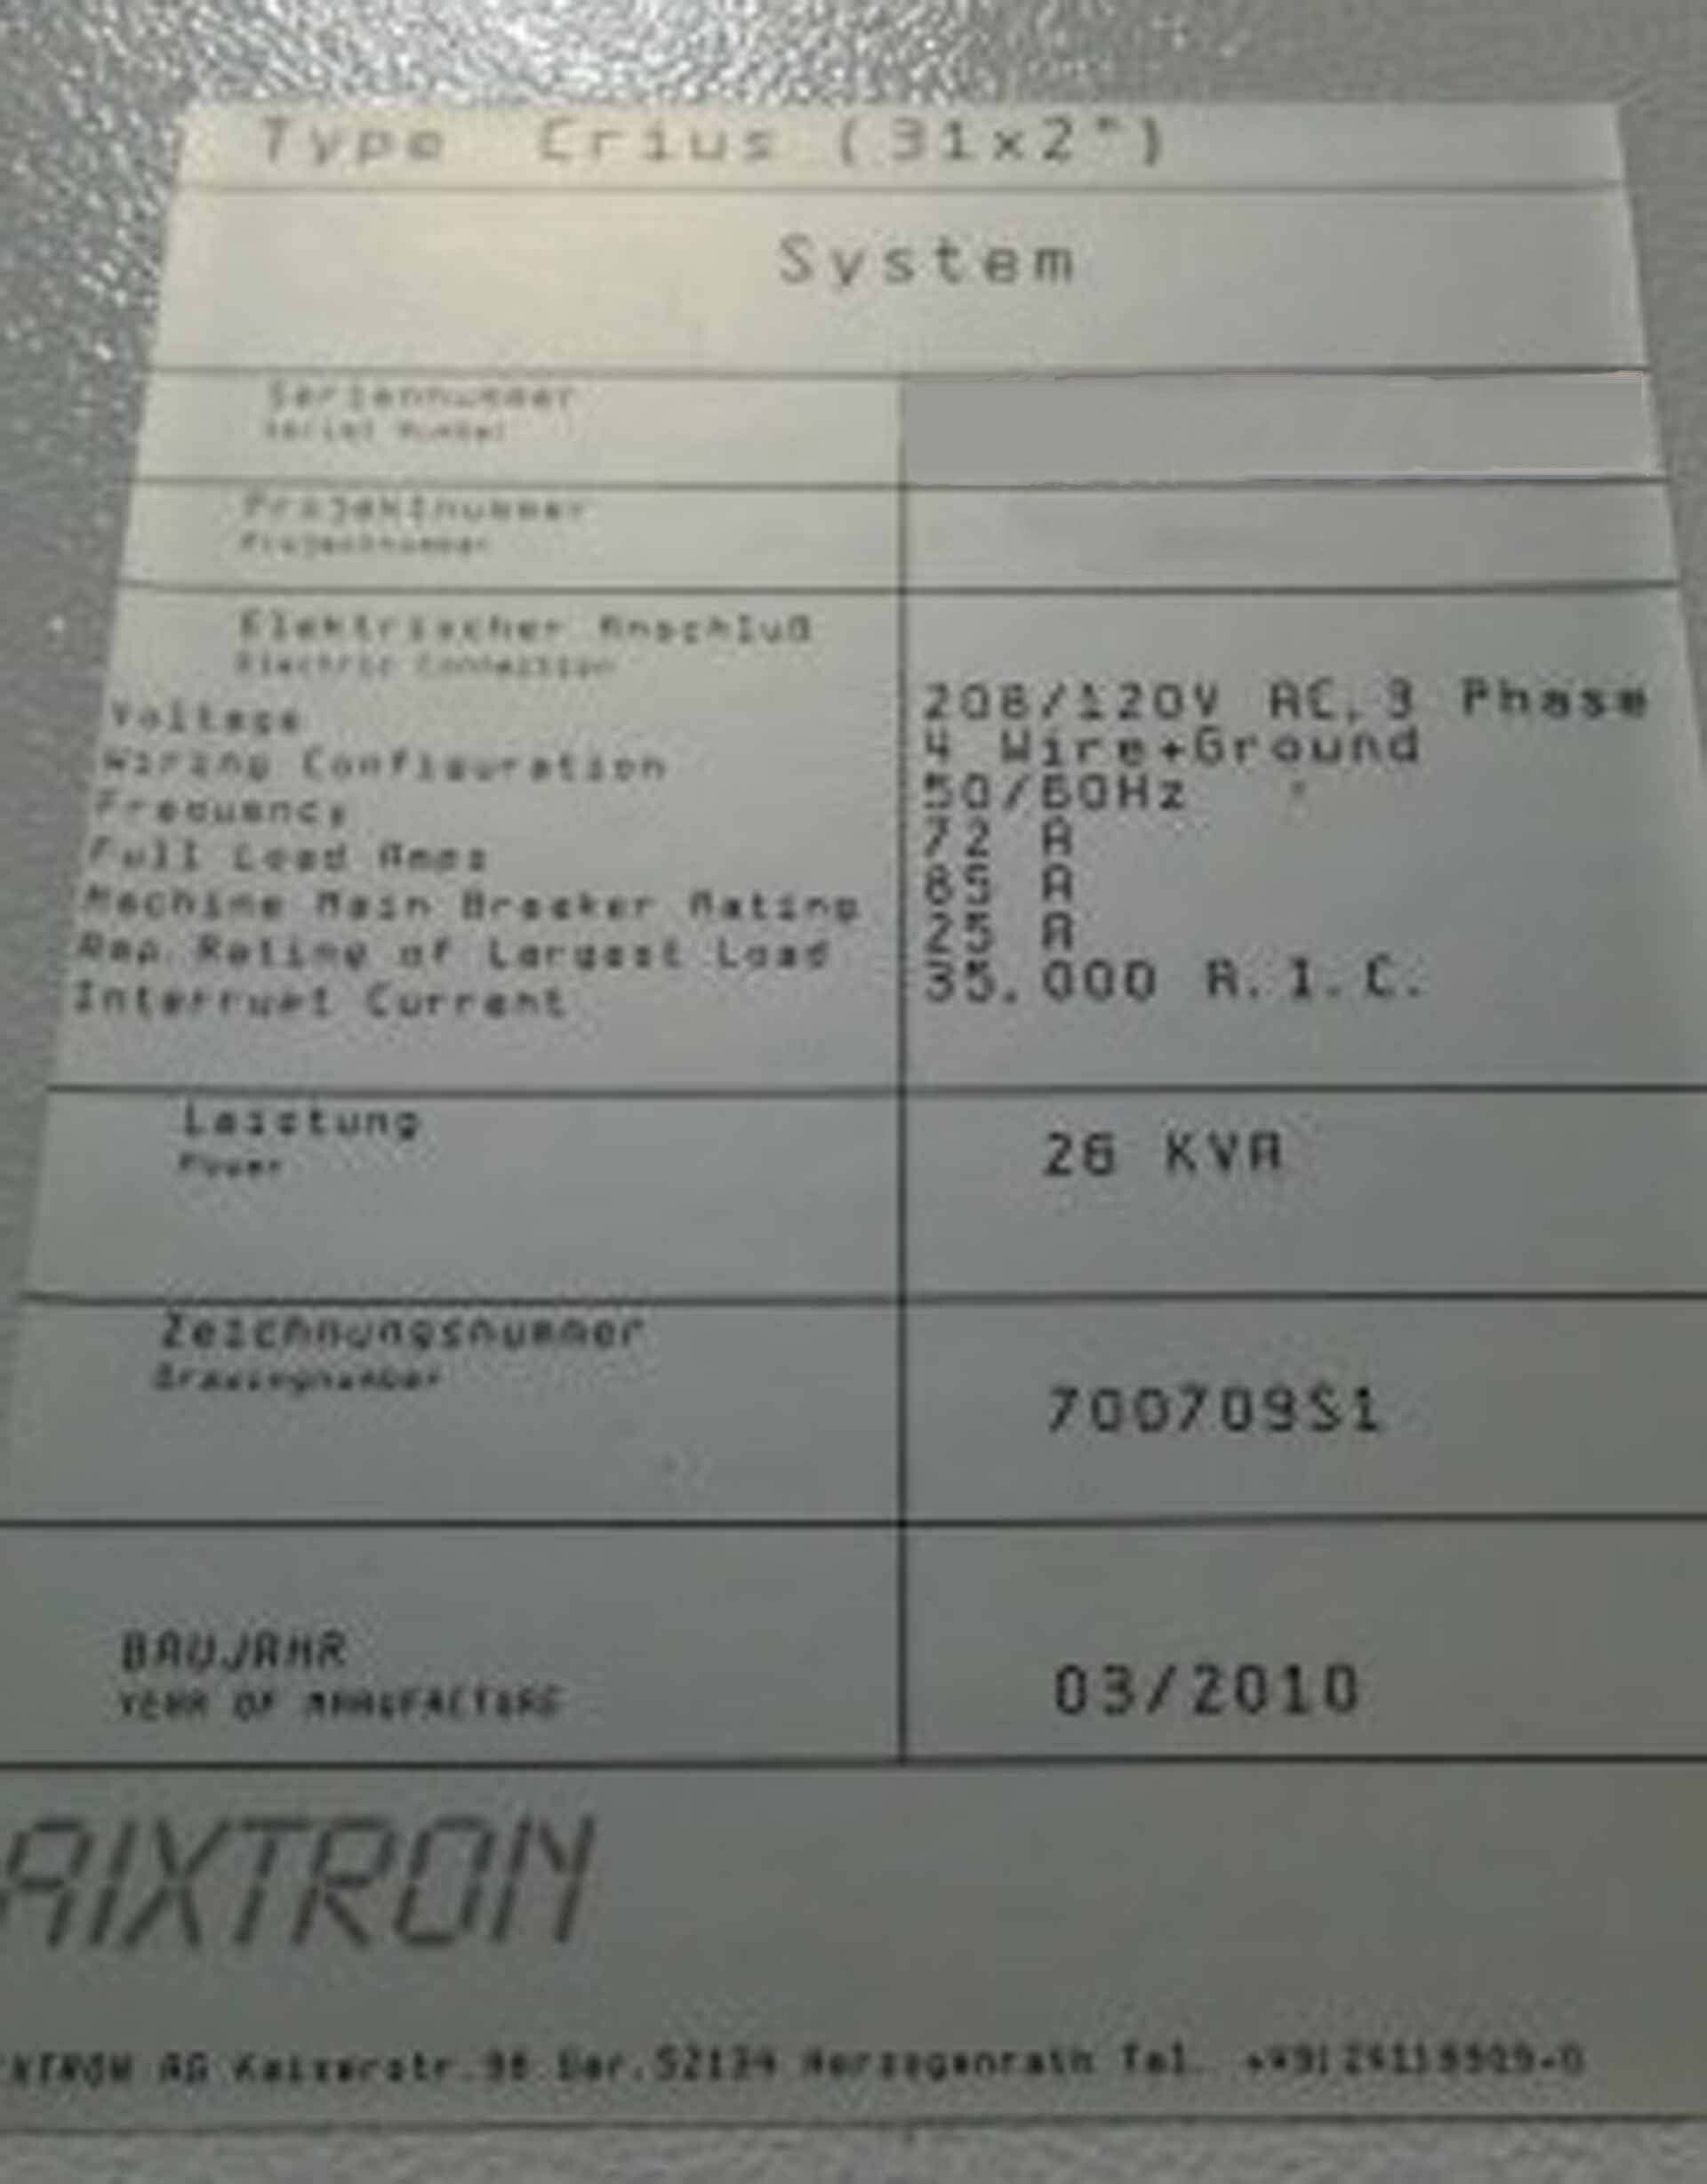 Photo Used AIXTRON AIX 2800 G4 HT For Sale